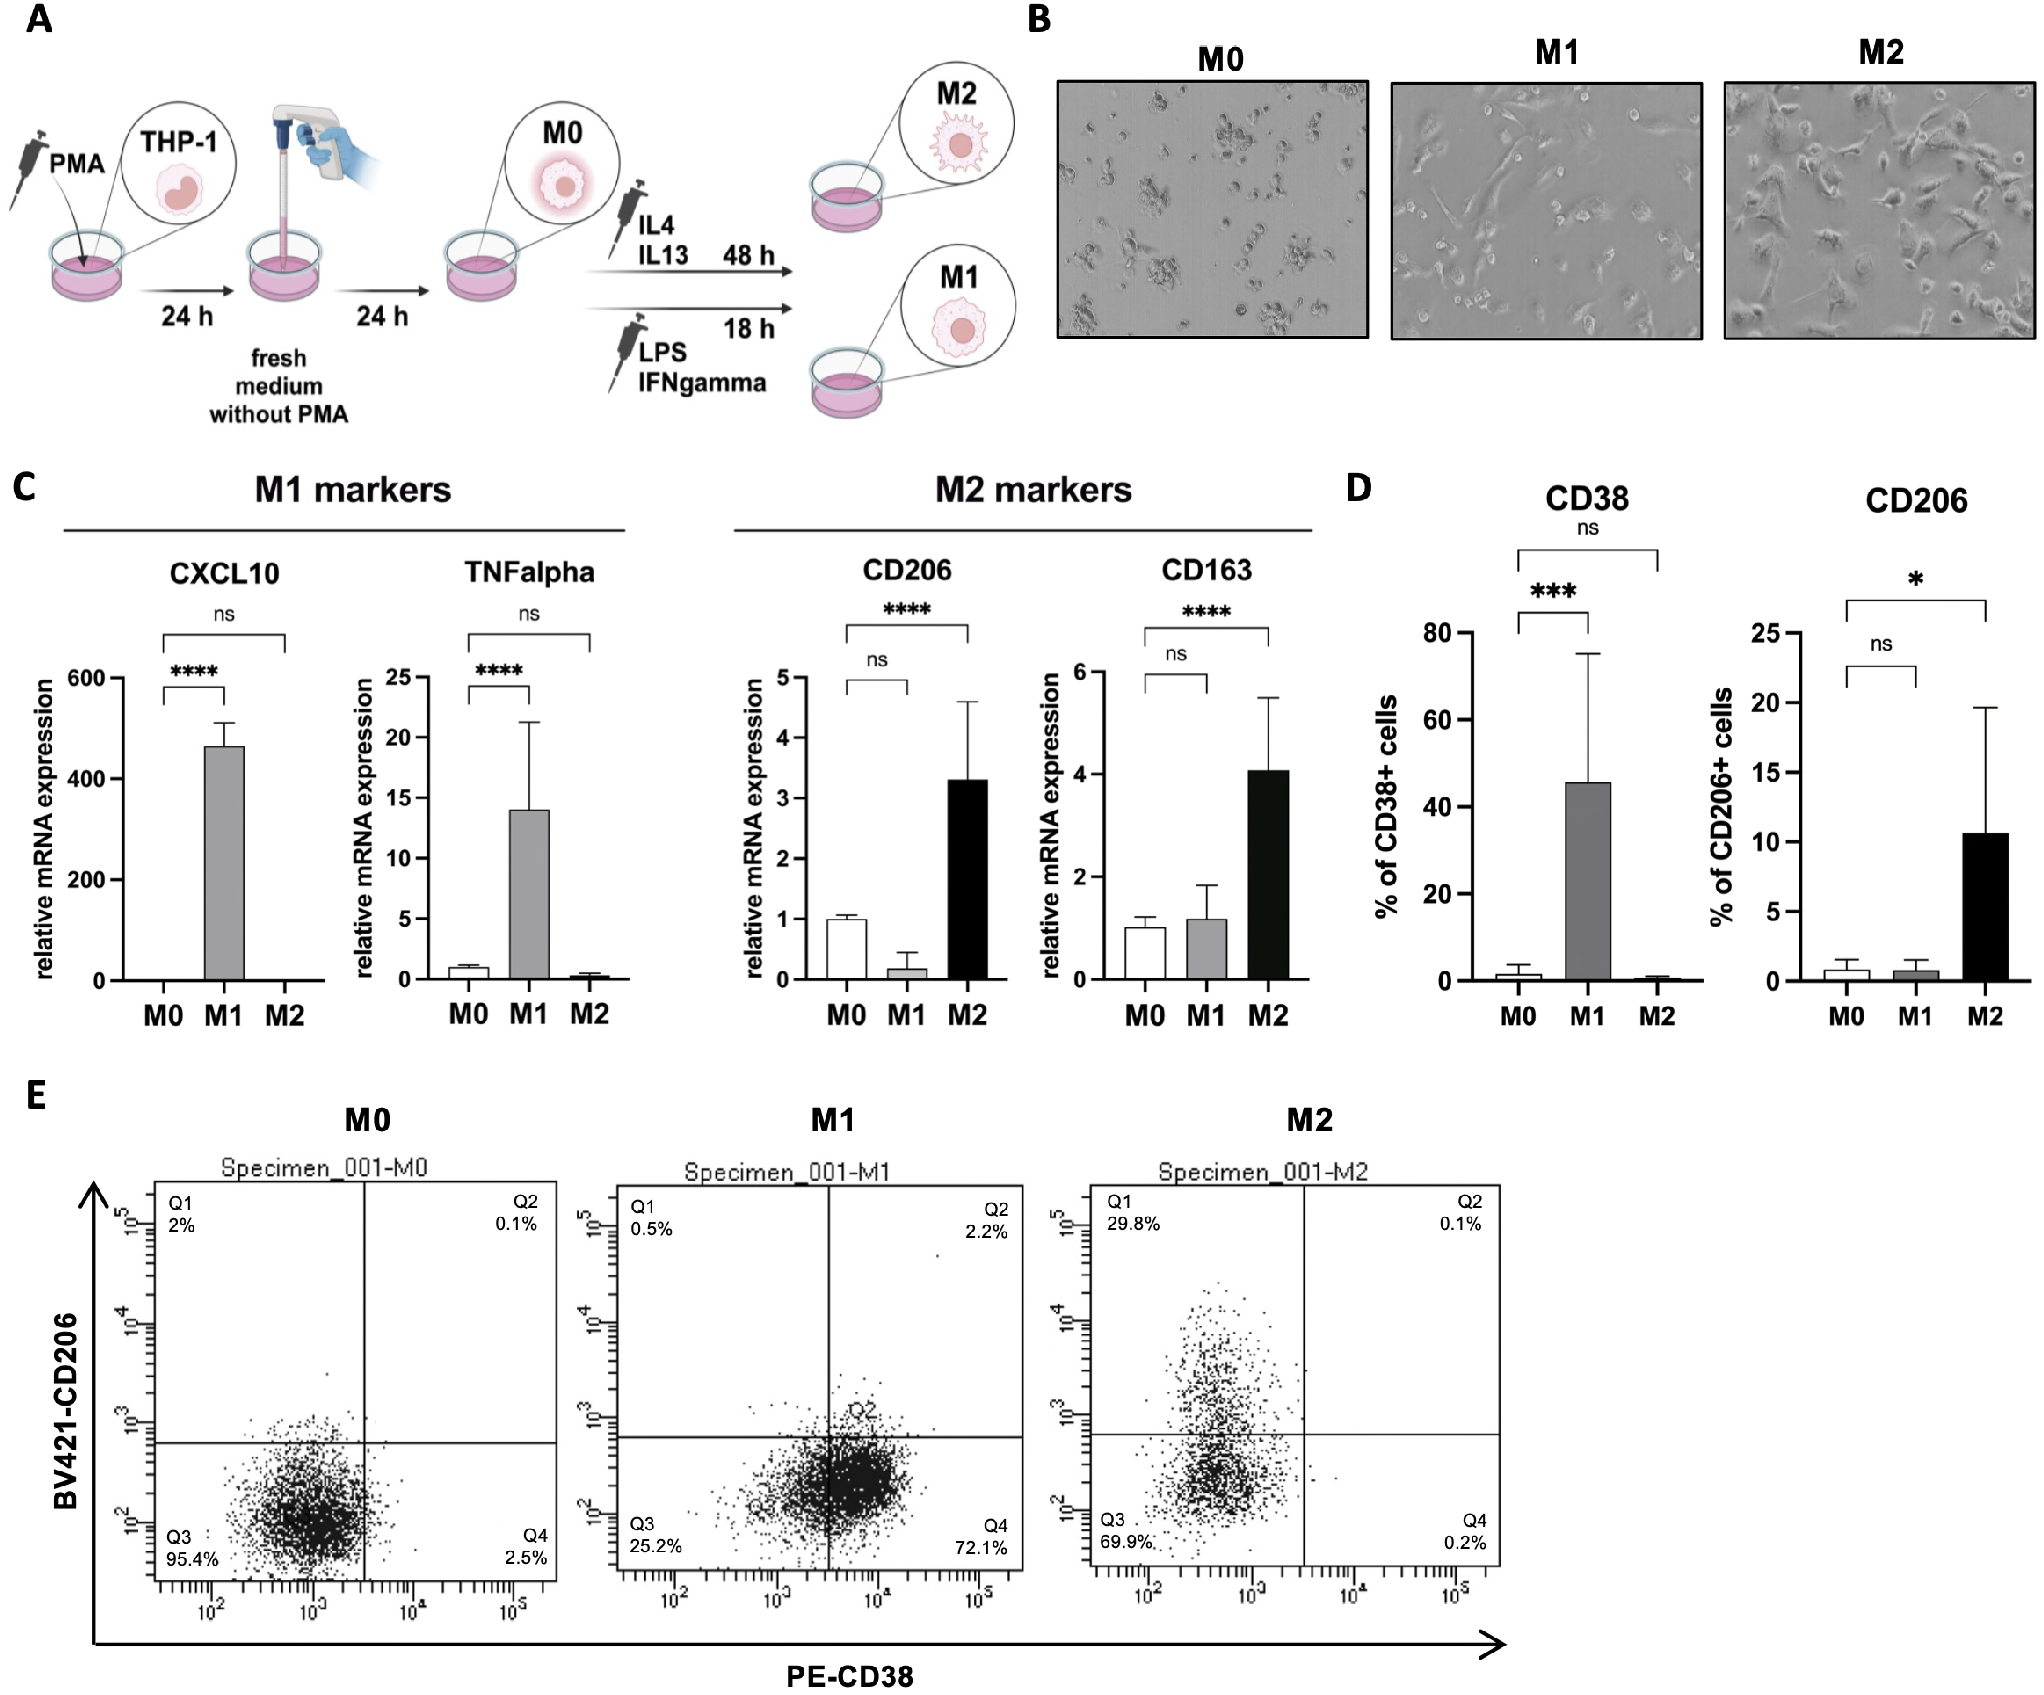 Protocols for Co-Culture Phenotypic Assays with Breast Cancer Cells and THP-1-Derived Macrophages